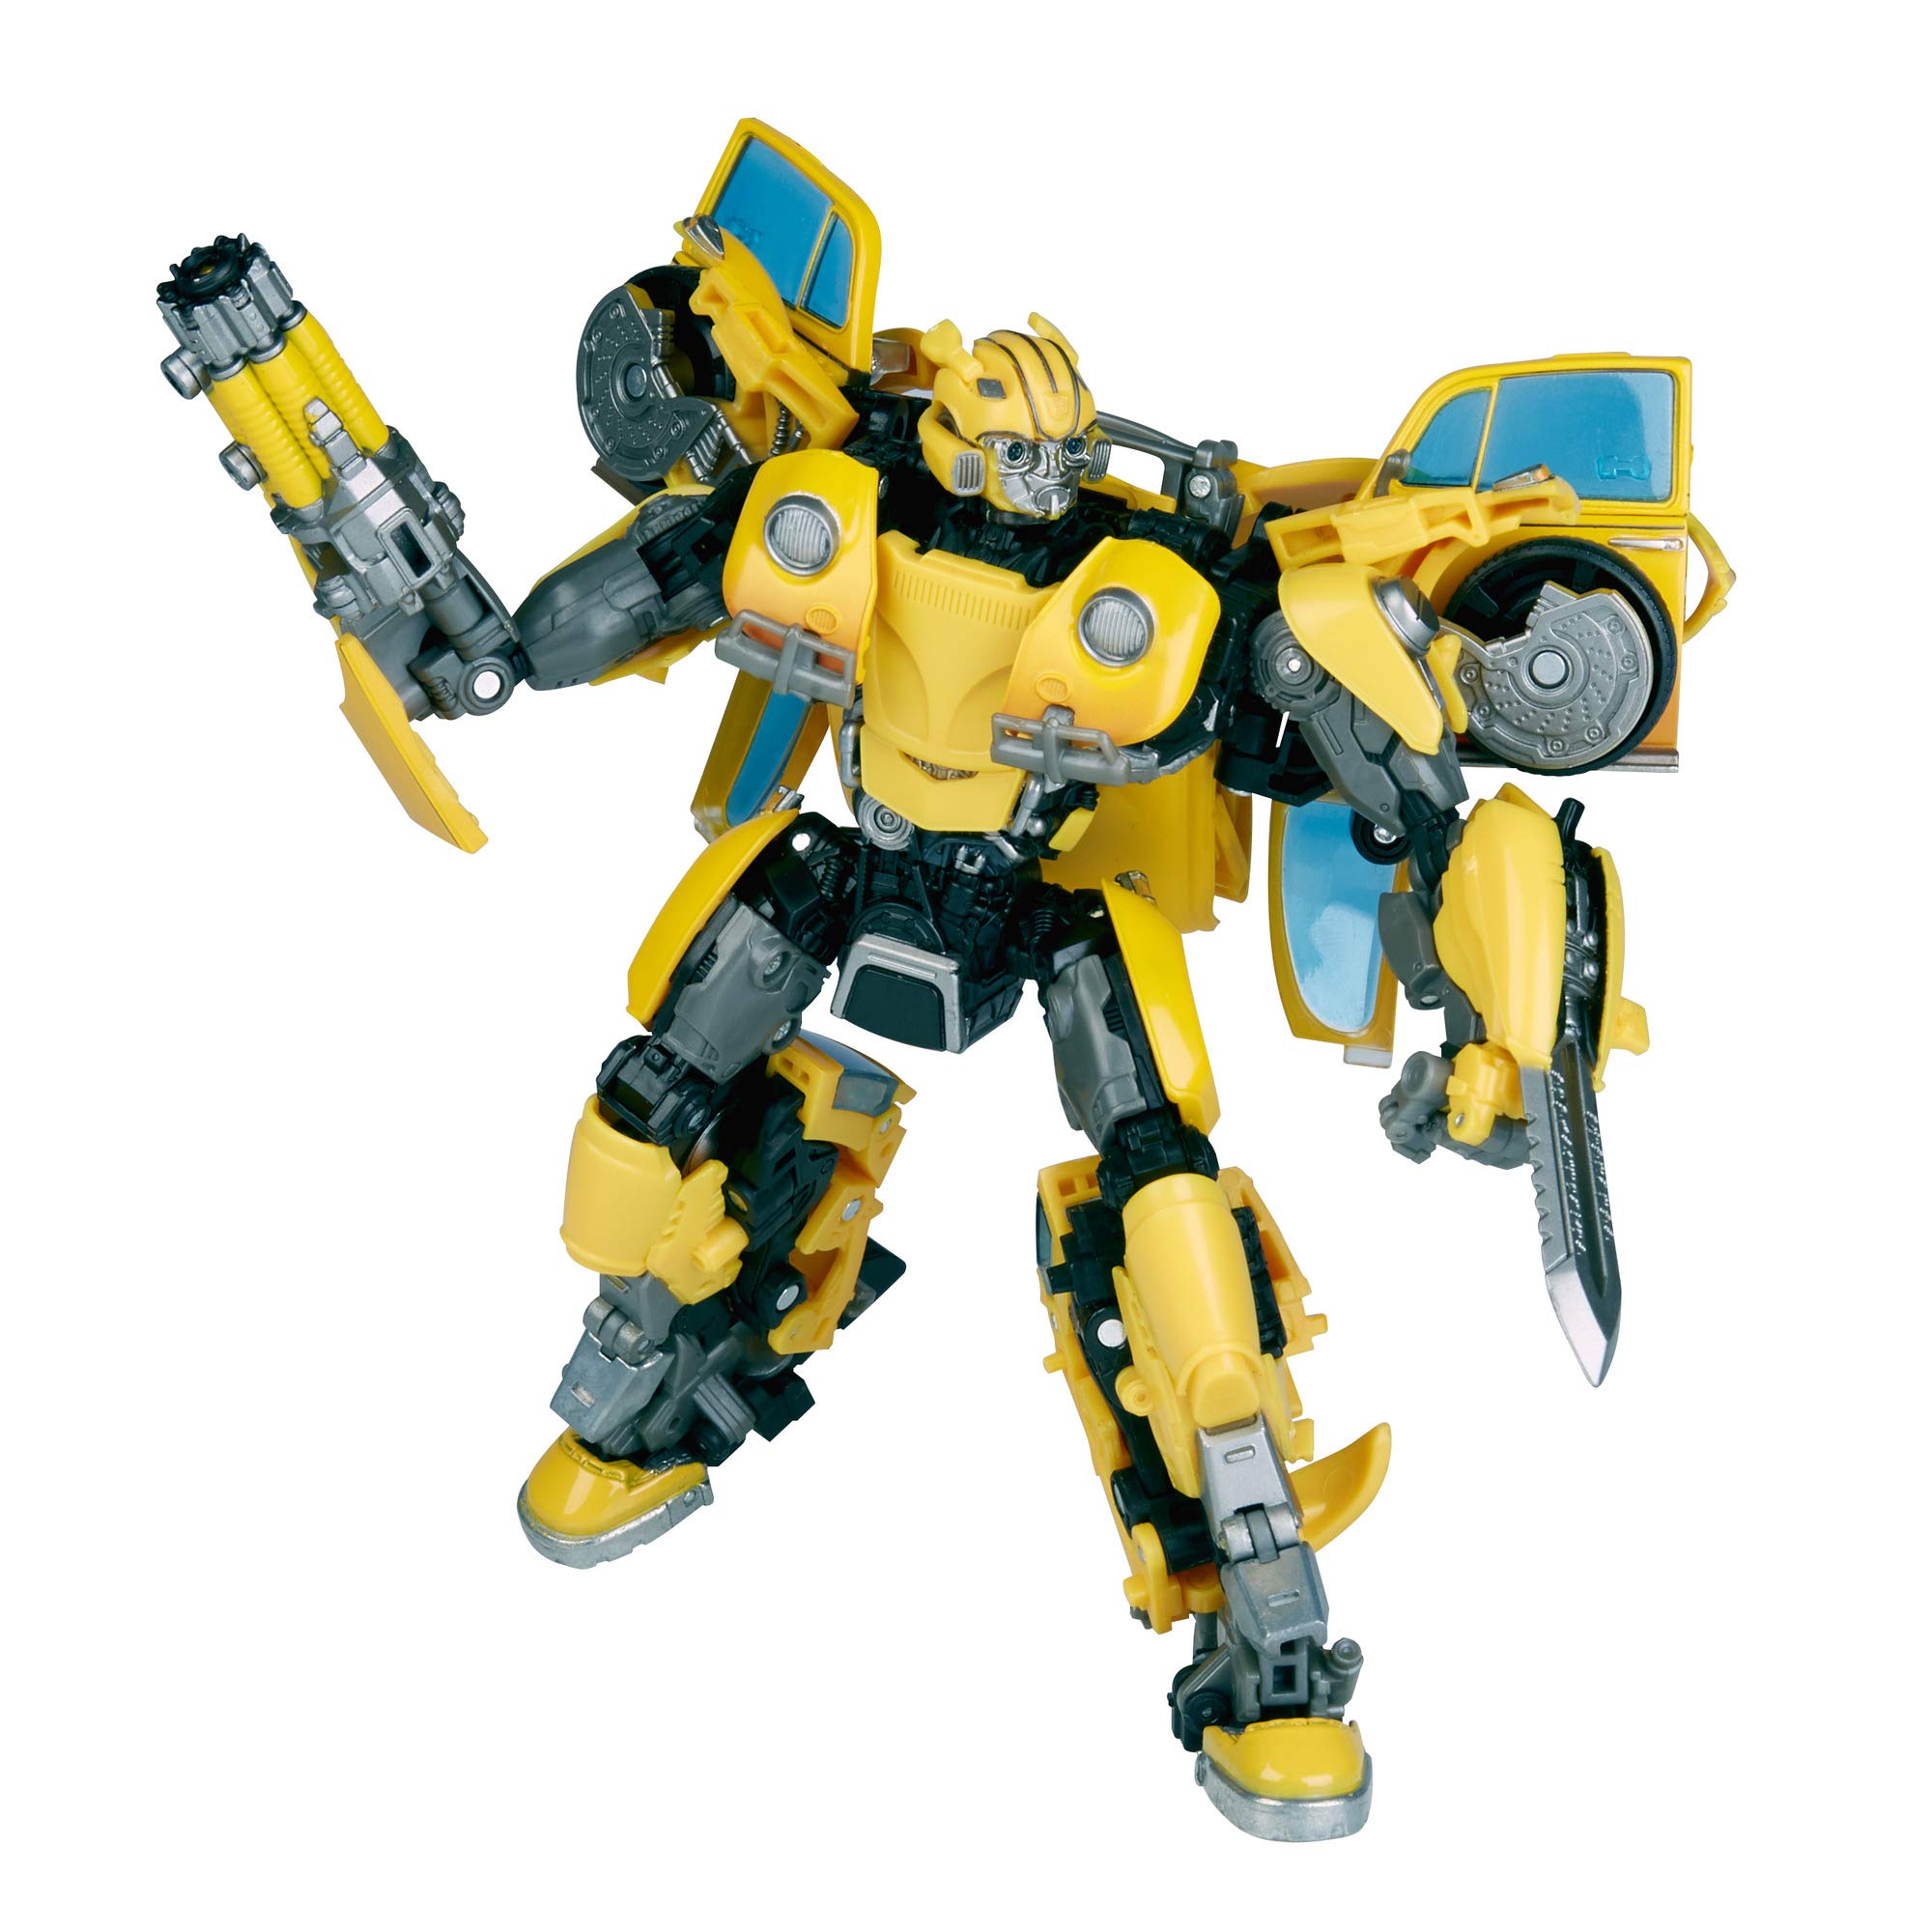 Transformers Official Hasbro-Takara Tomy Collaboration Masterpiece Movie Series Bumblebee MPM-7 Toy